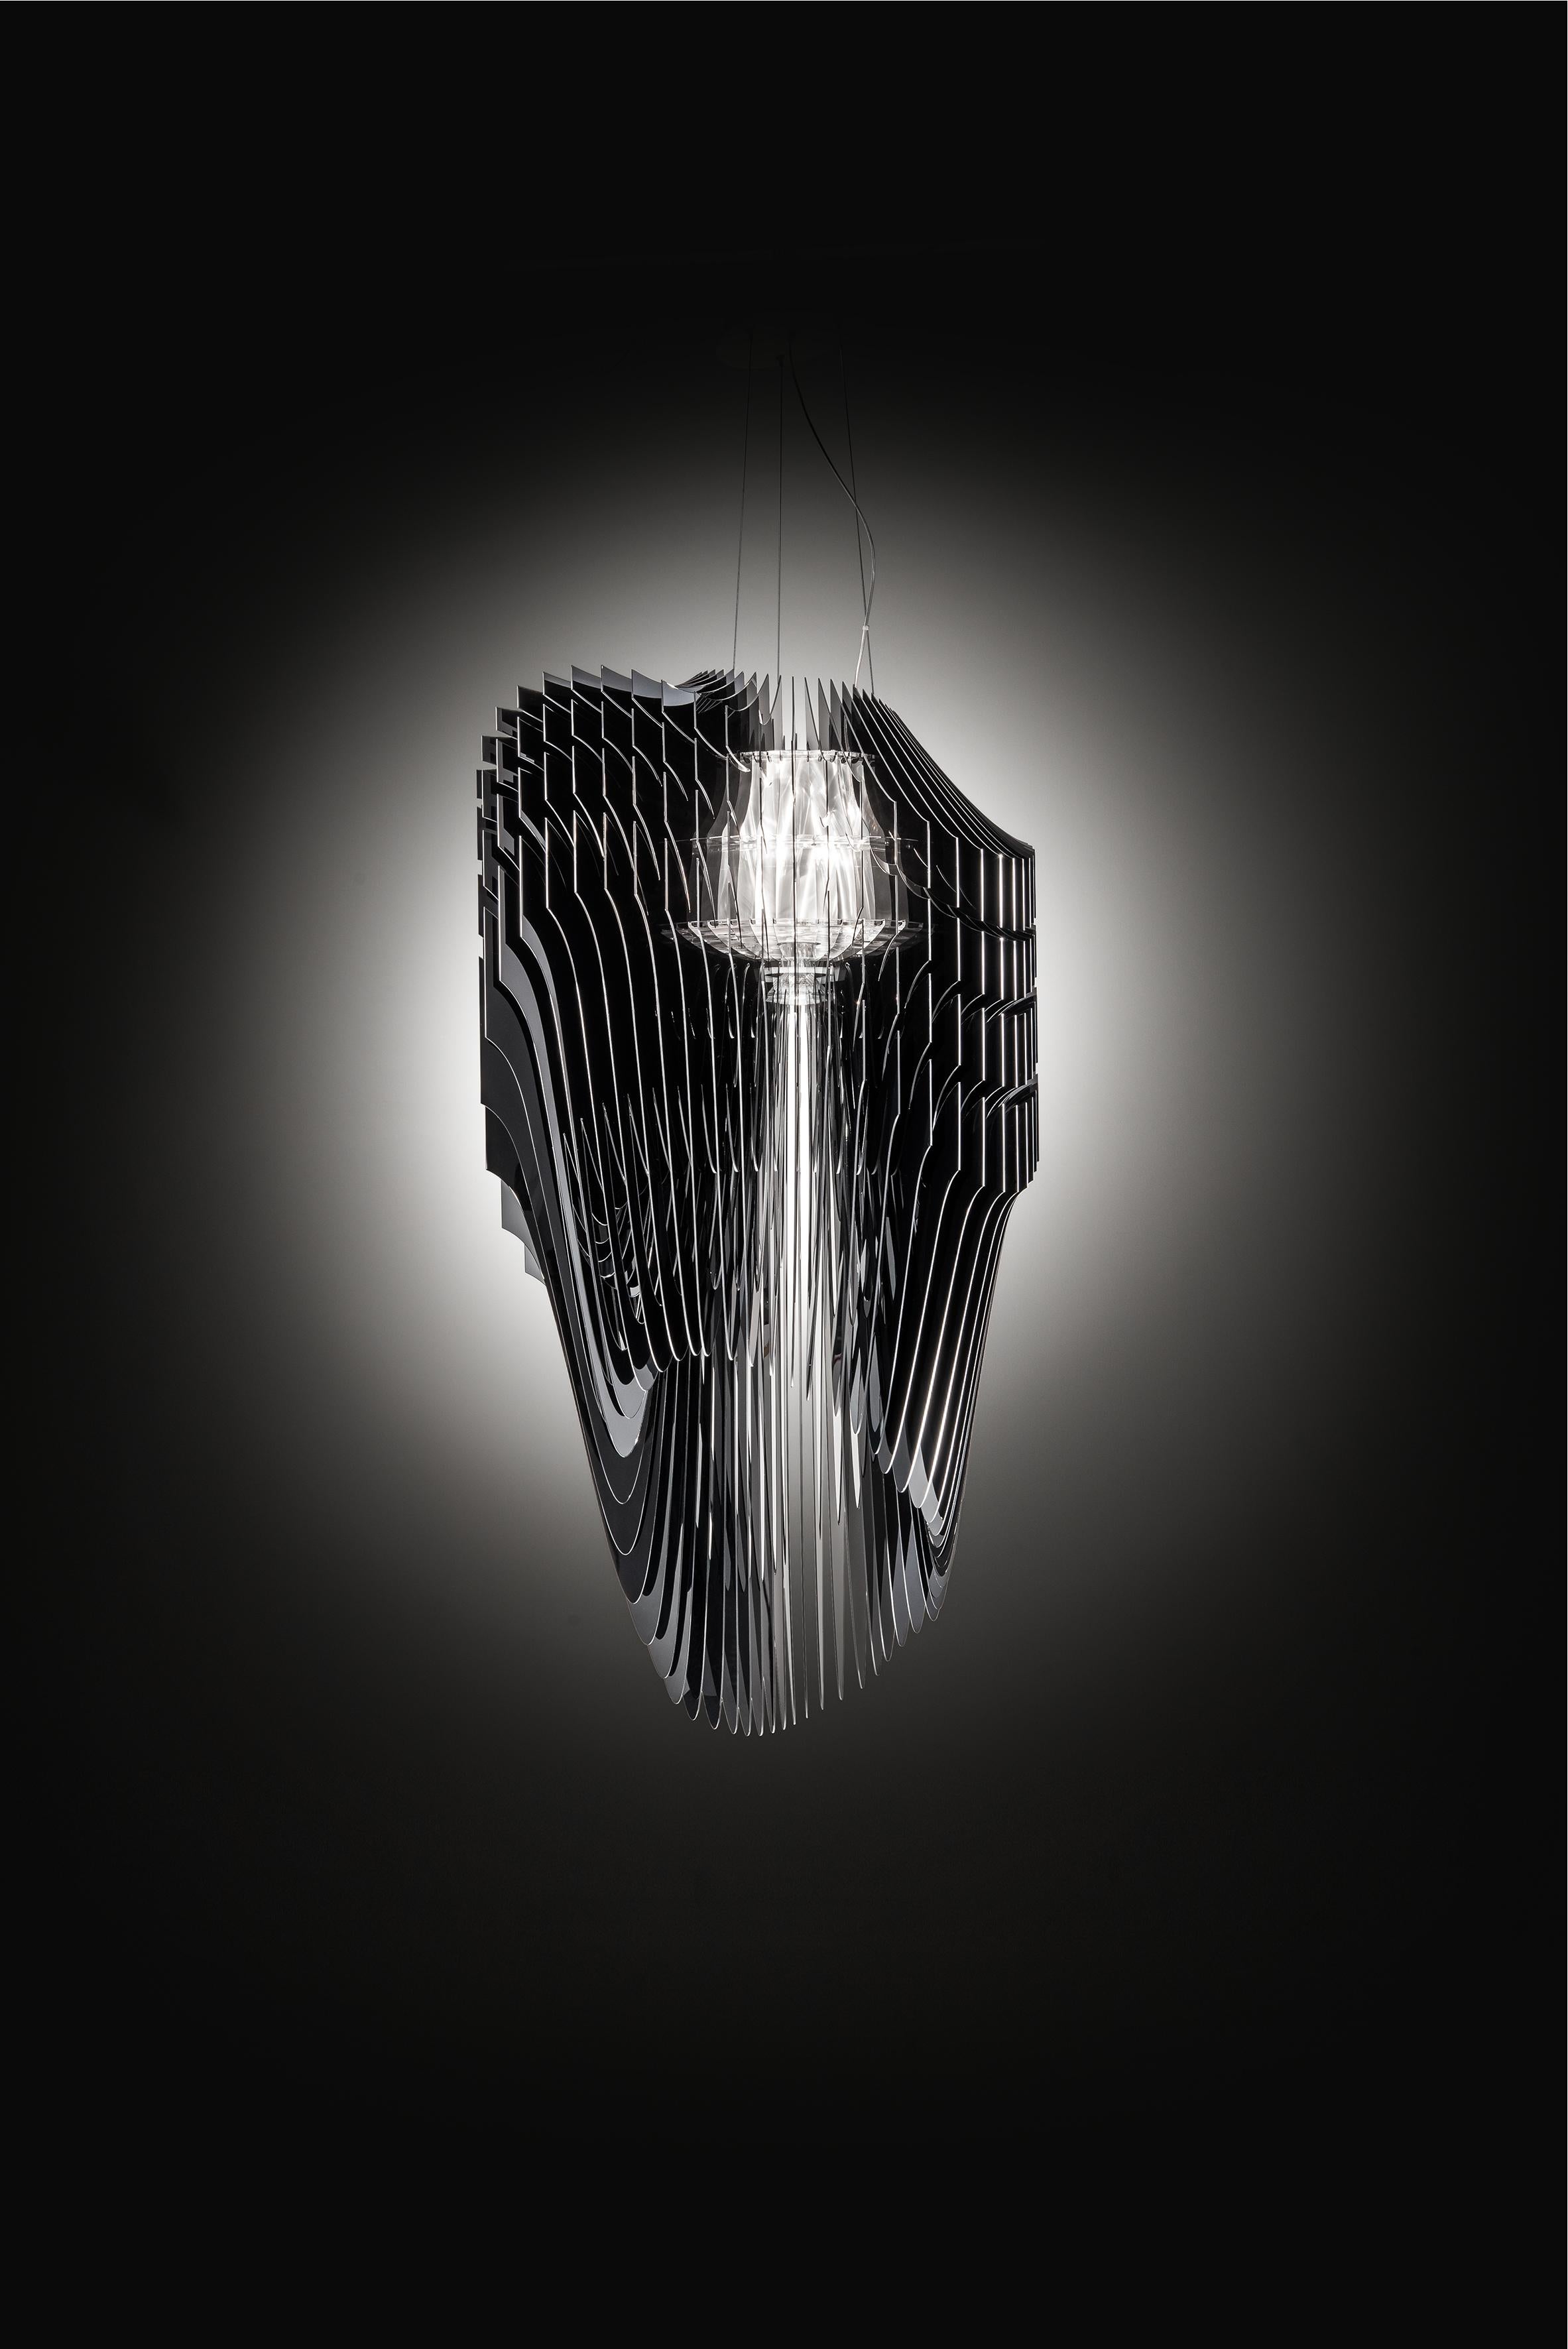 Zaha Hadid’s visionary, fluid, and dynamic luminous architectural objects bring the designer’s revolutionary and iconic semantics to any domestic or public space, inspiring harmony between beings and atmospheres. Avia brings the grandeur of